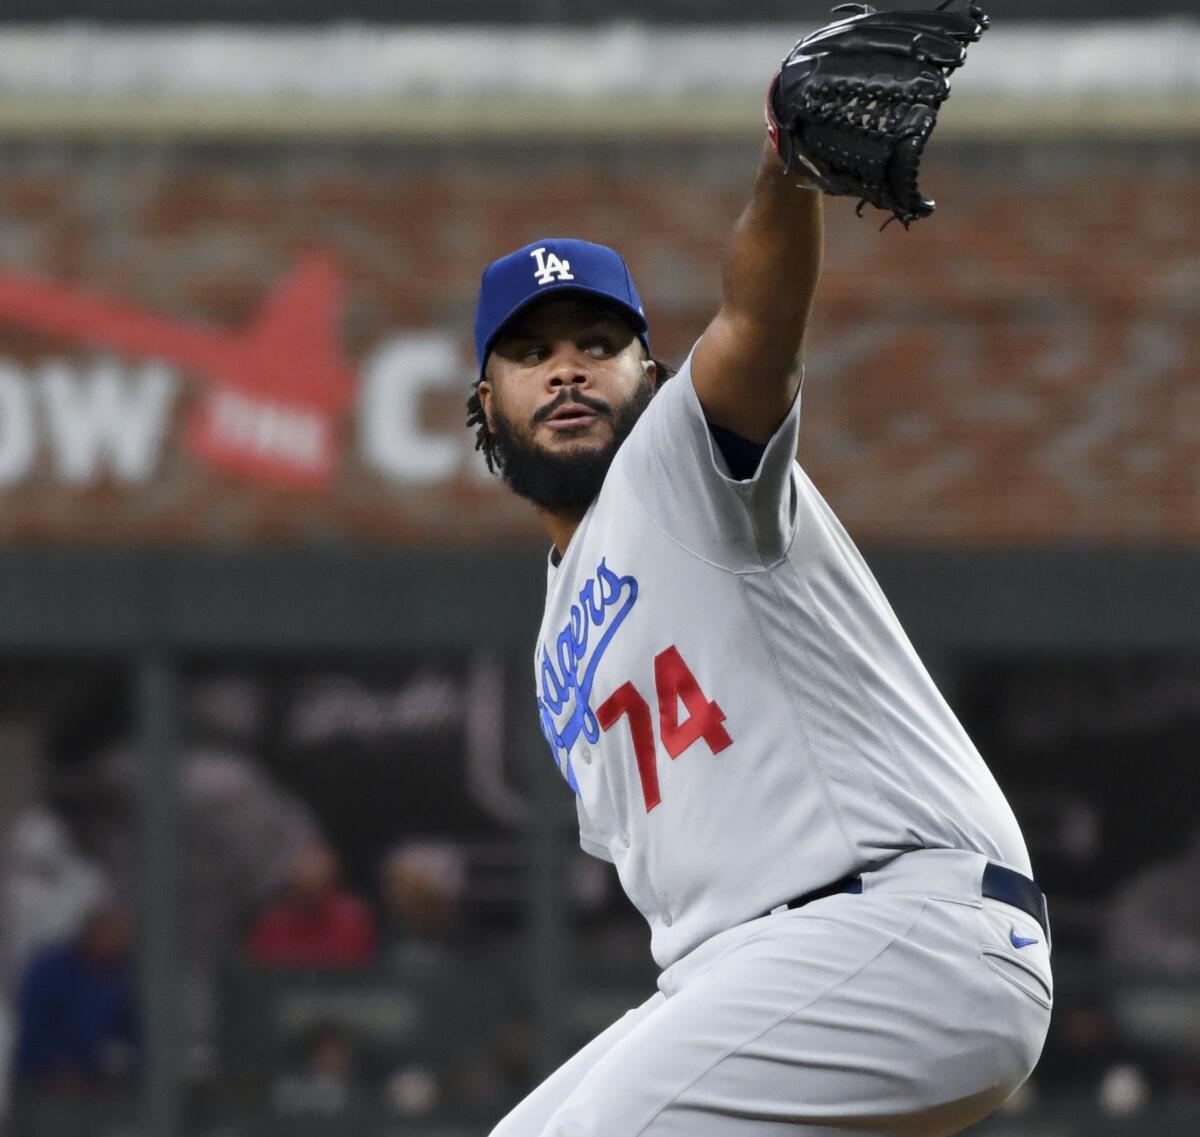 Dodgers relief pitcher Kenley Jansen delivers during the eighth inning.